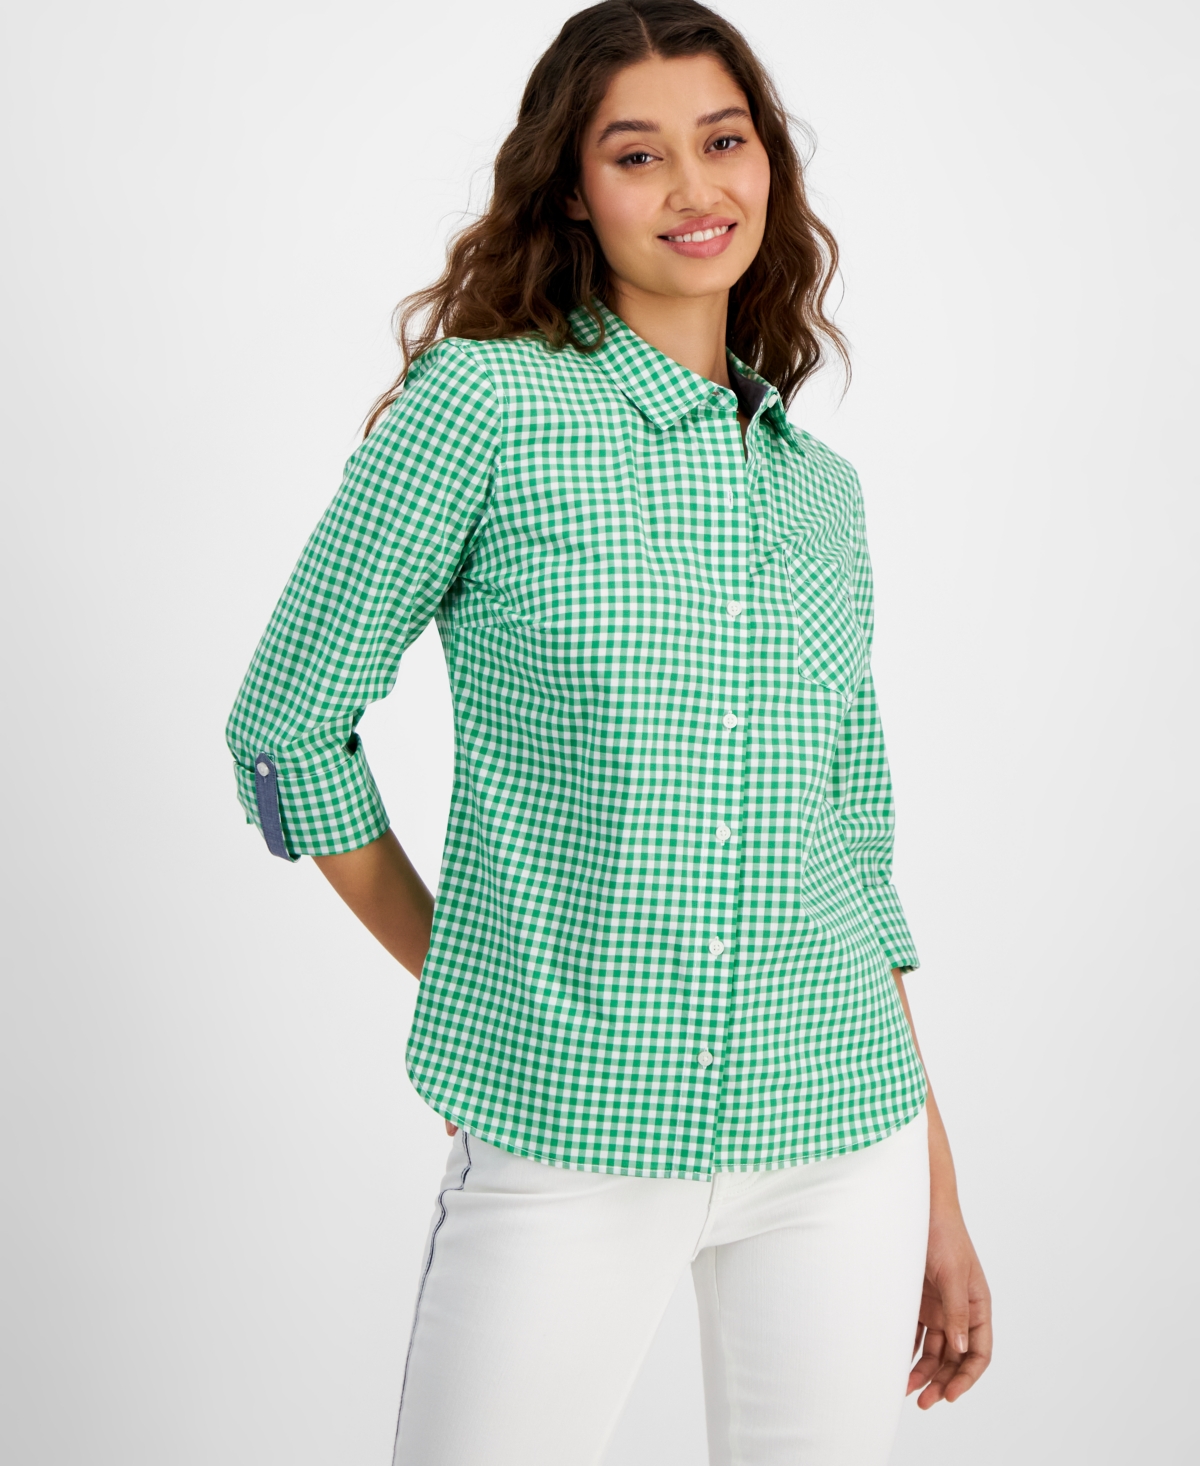 TOMMY HILFIGER Shirts for Women